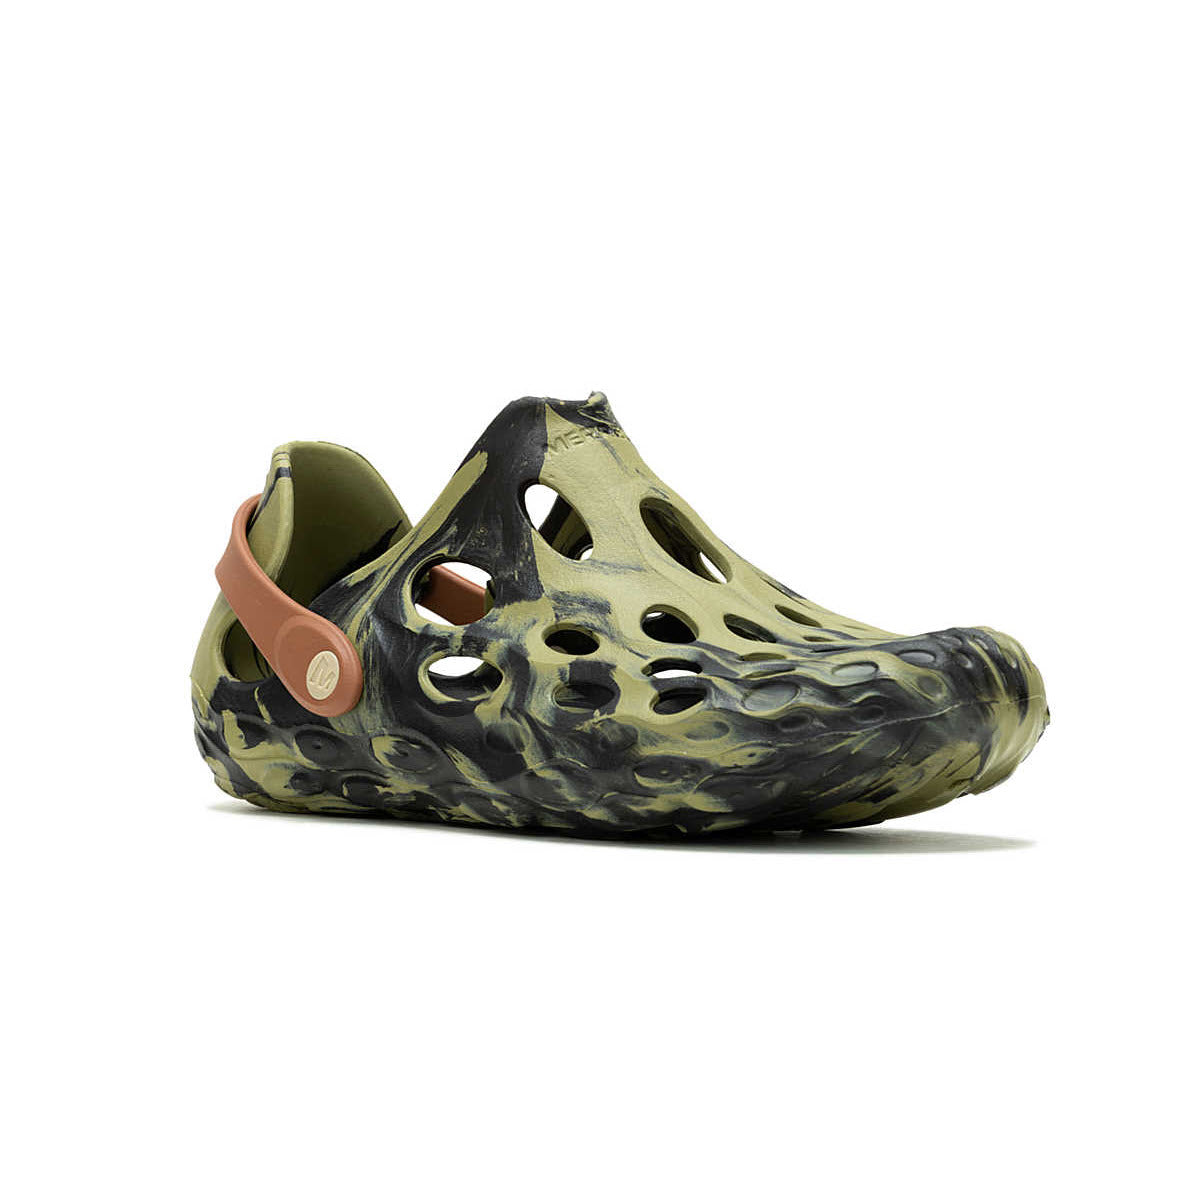 A single camouflage-patterned Merrell Hydro Moc foam clog shoe with ventilation holes and a pivoting heel strap, isolated on a white background.